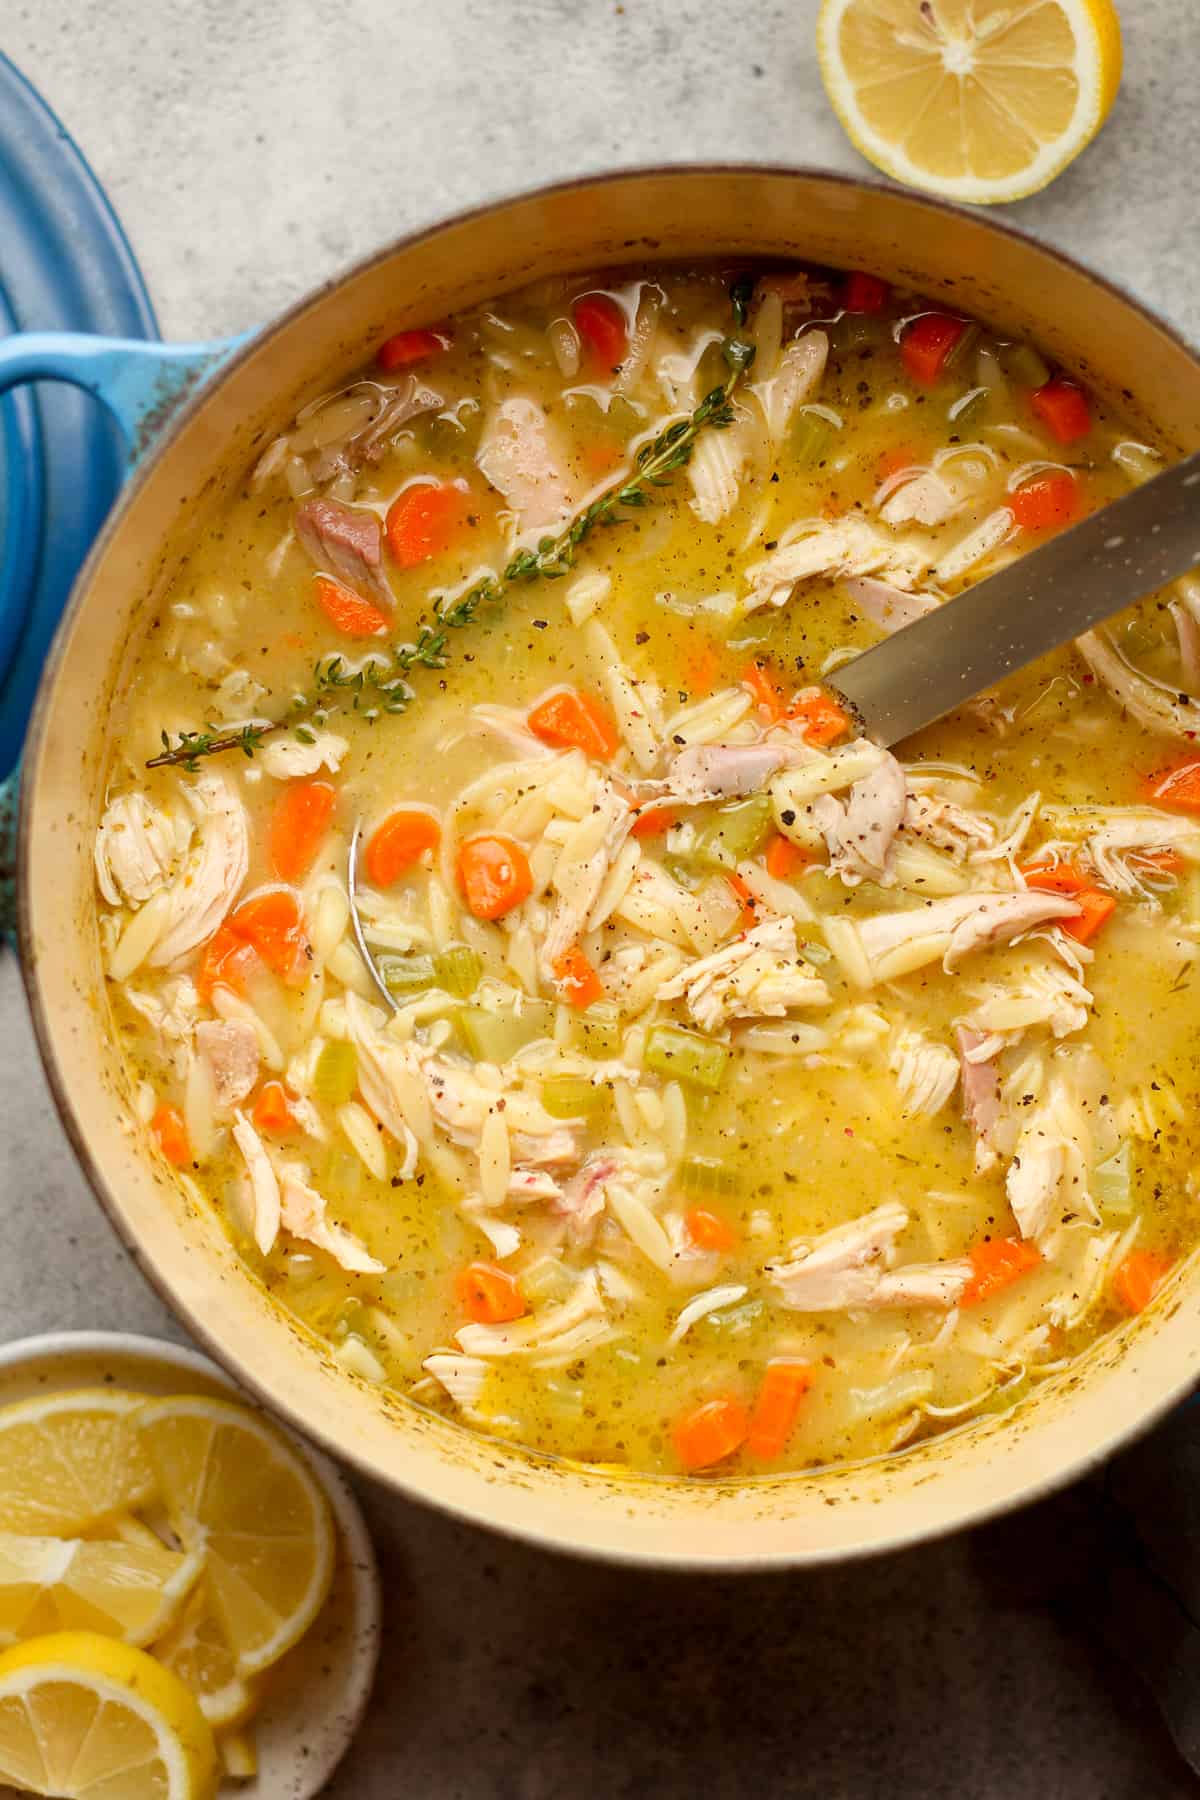 A stock pot of the chicken soup with orzo and lemon.